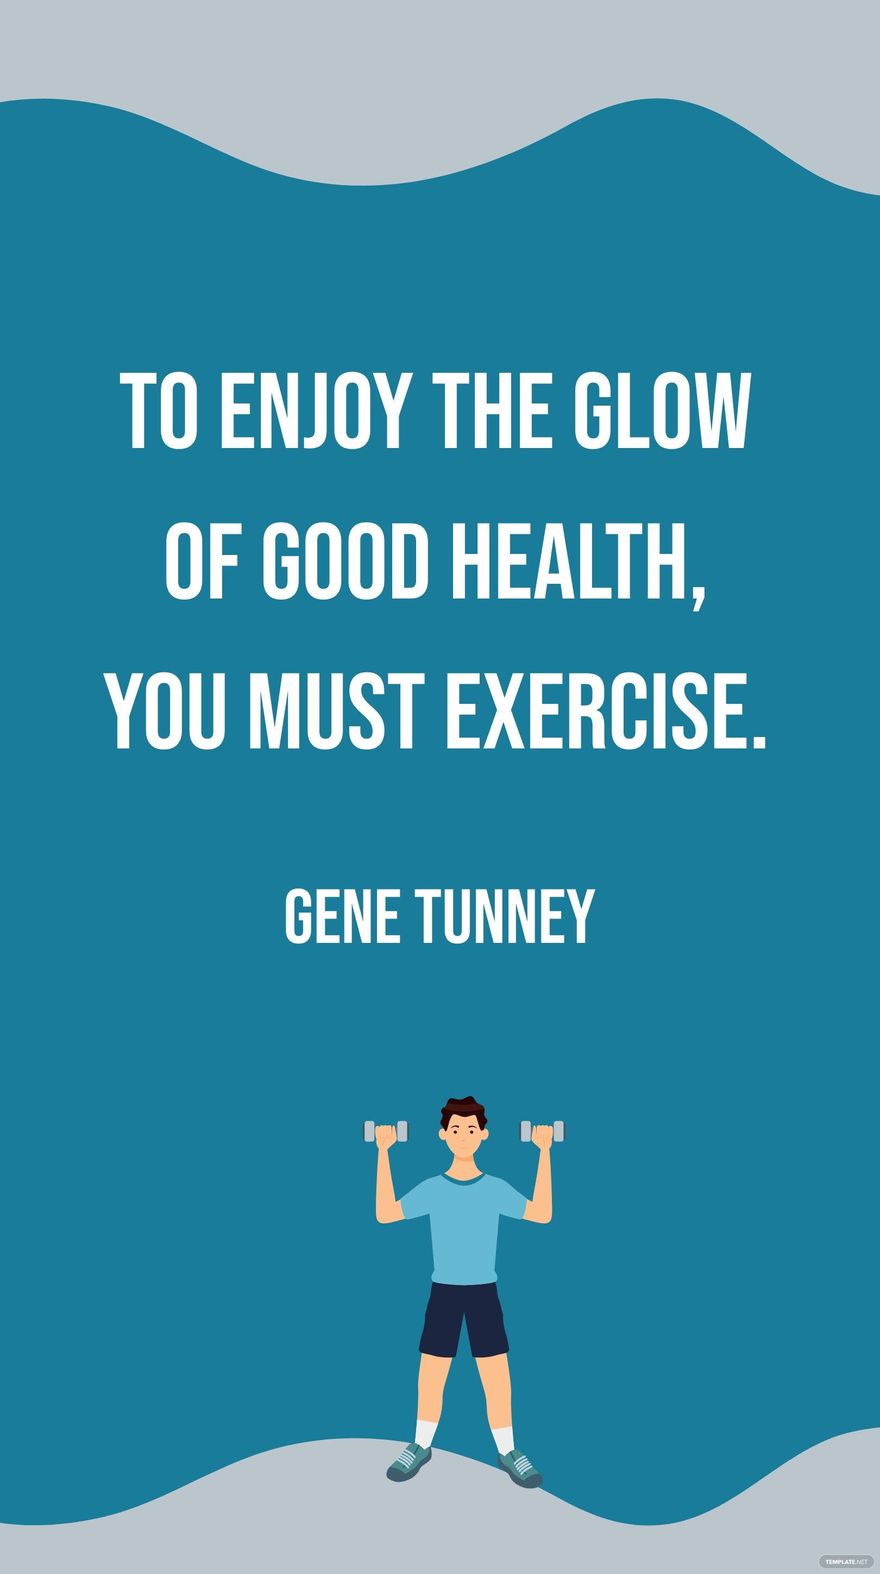 Gene Tunney - To enjoy the glow of good health, you must exercise. in JPG